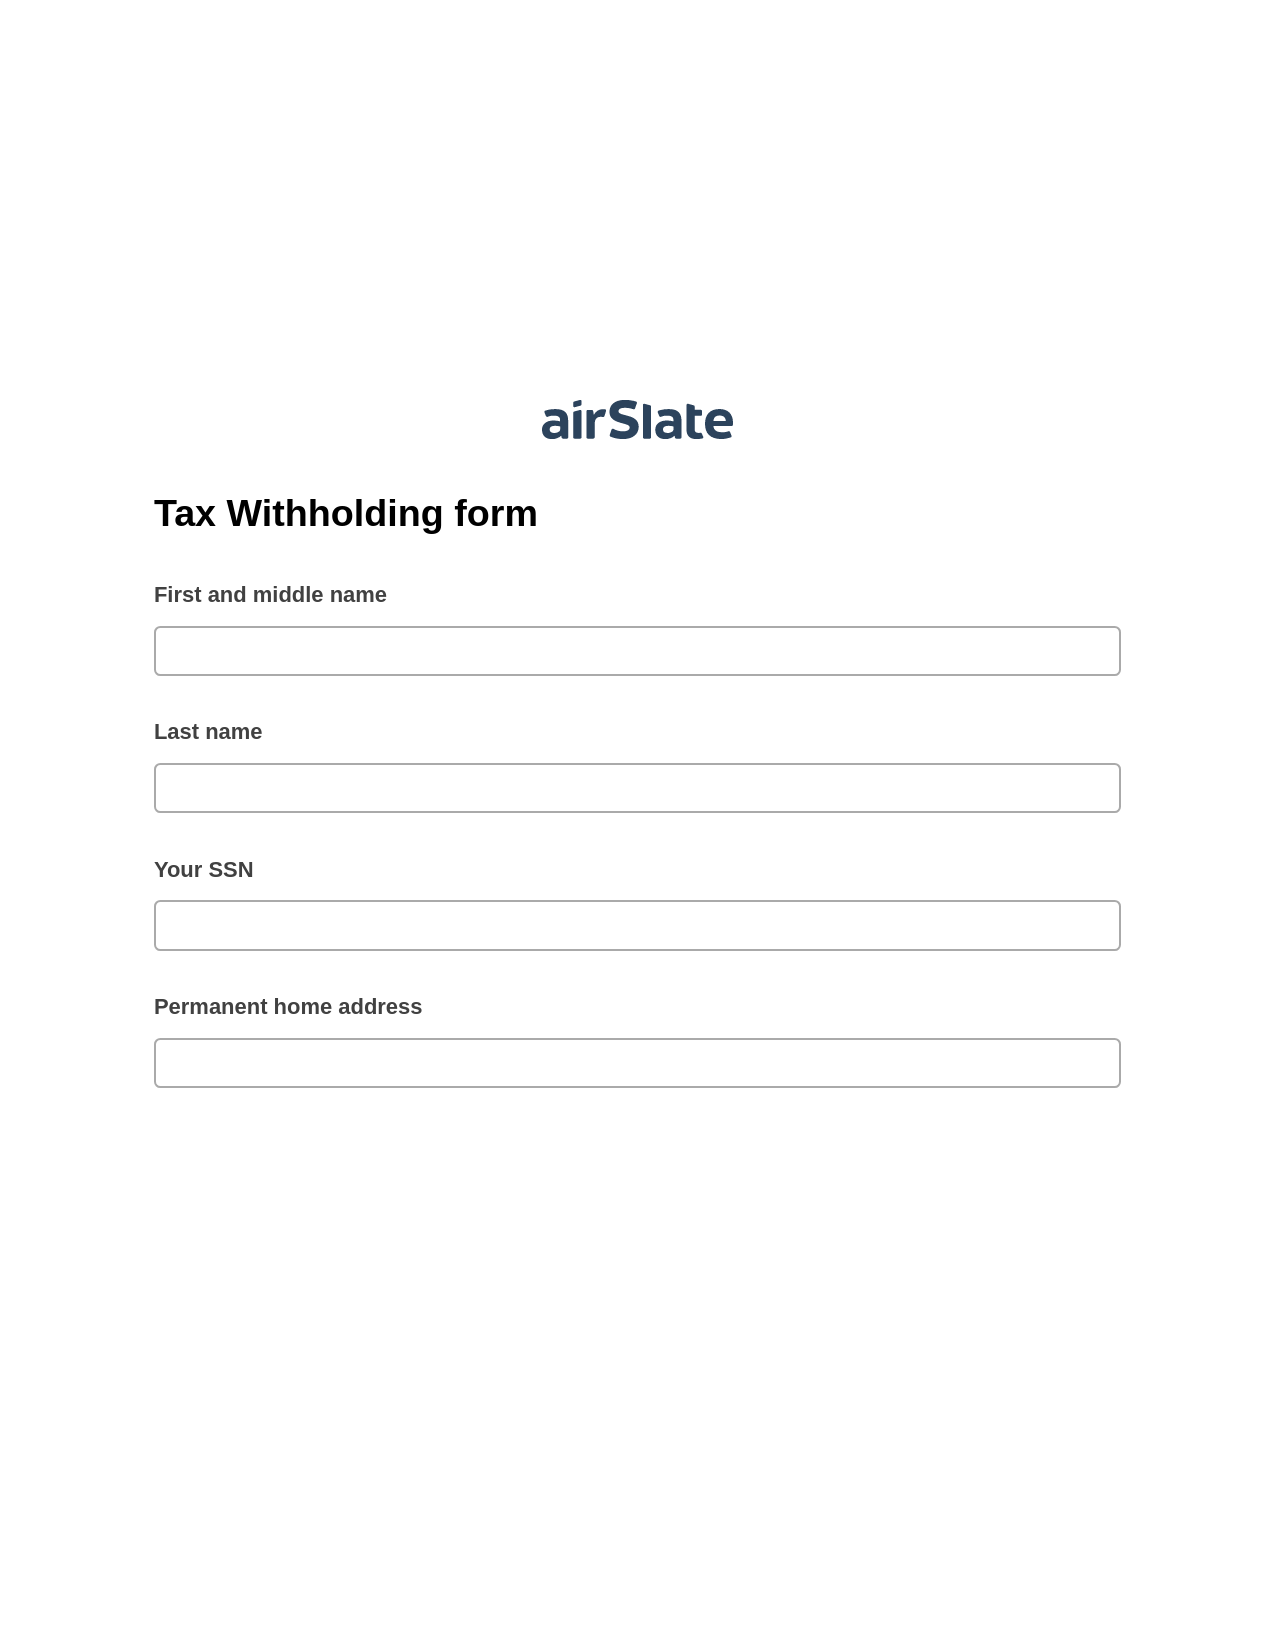 Tax Withholding form Pre-fill Document Bot, Assign Roles to Recipients Bot, Box Bot